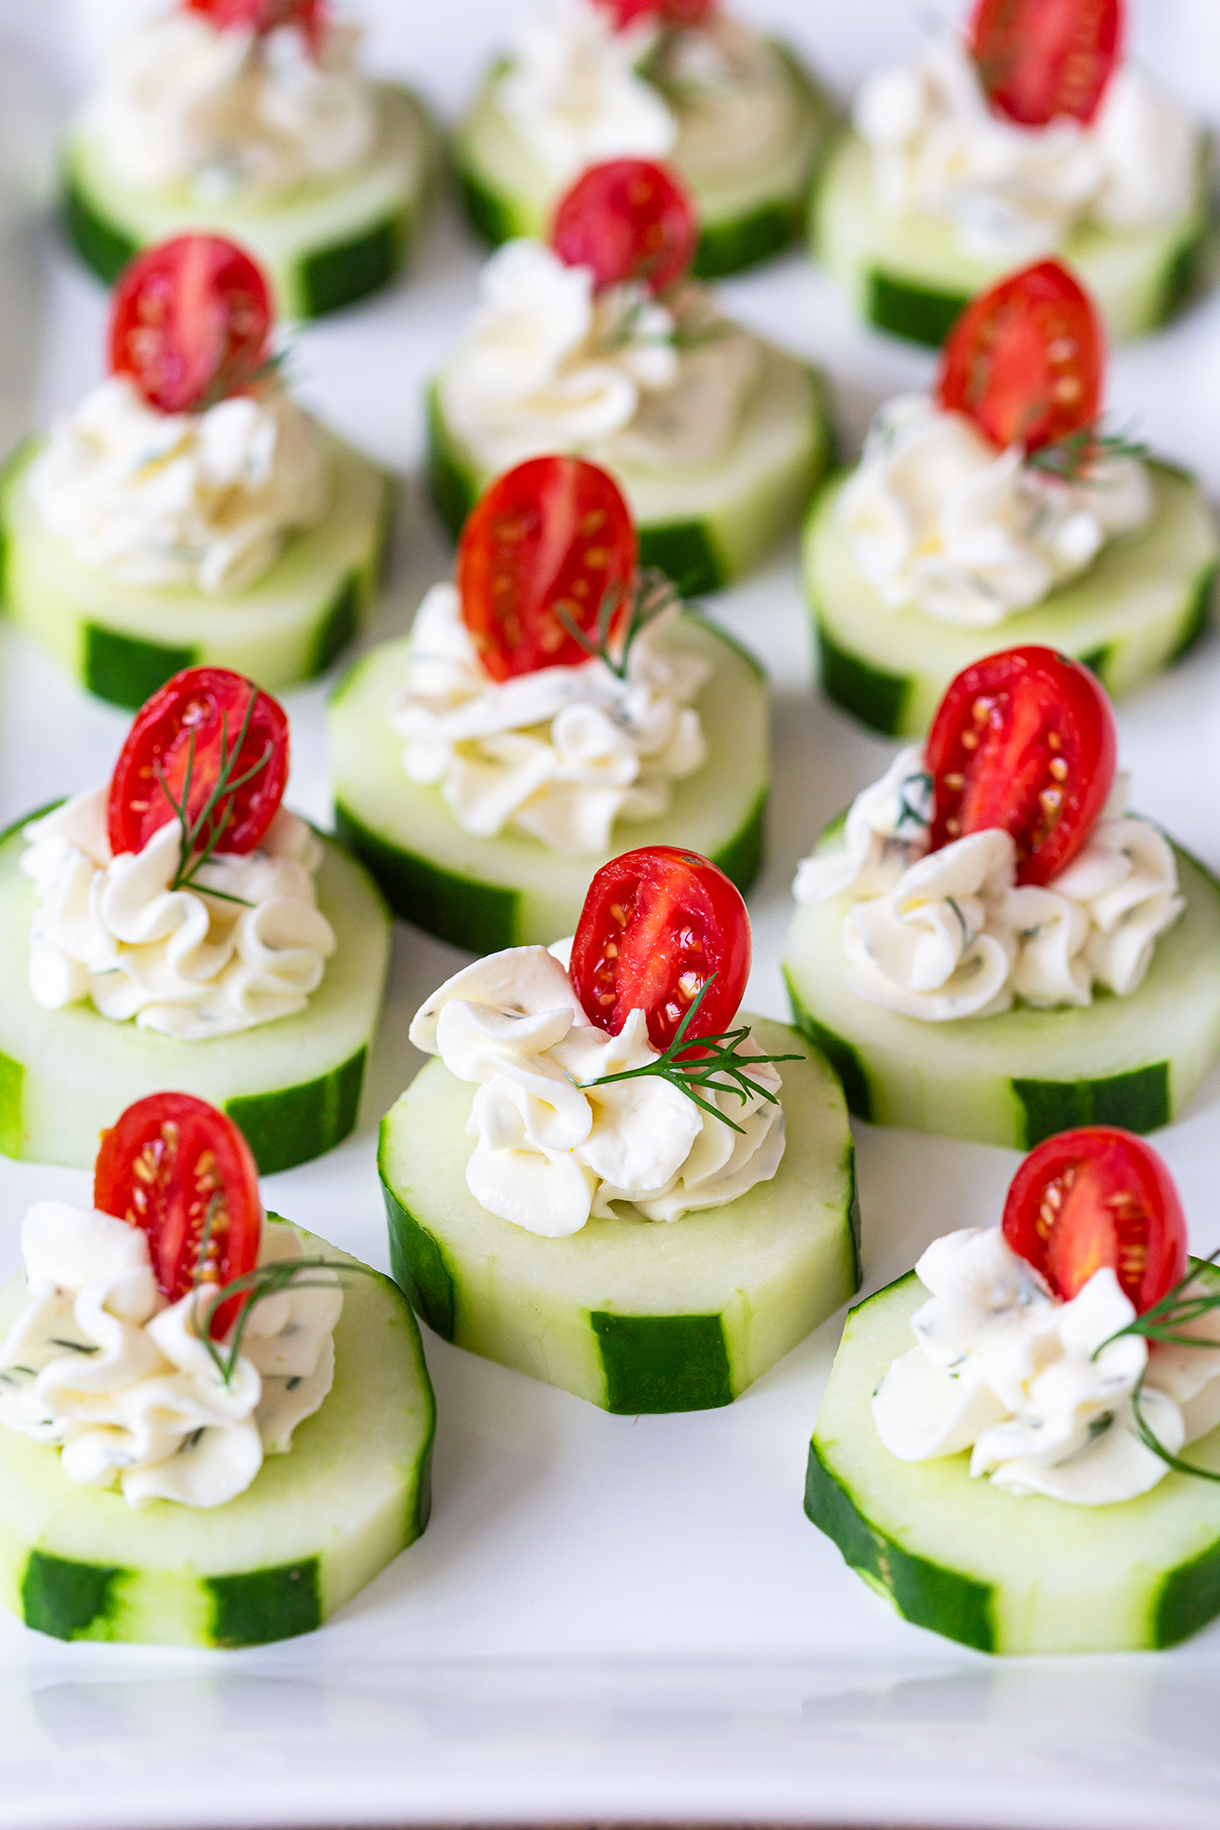 Cucumber Cream Cheese Bites with Tomatoes and Dill